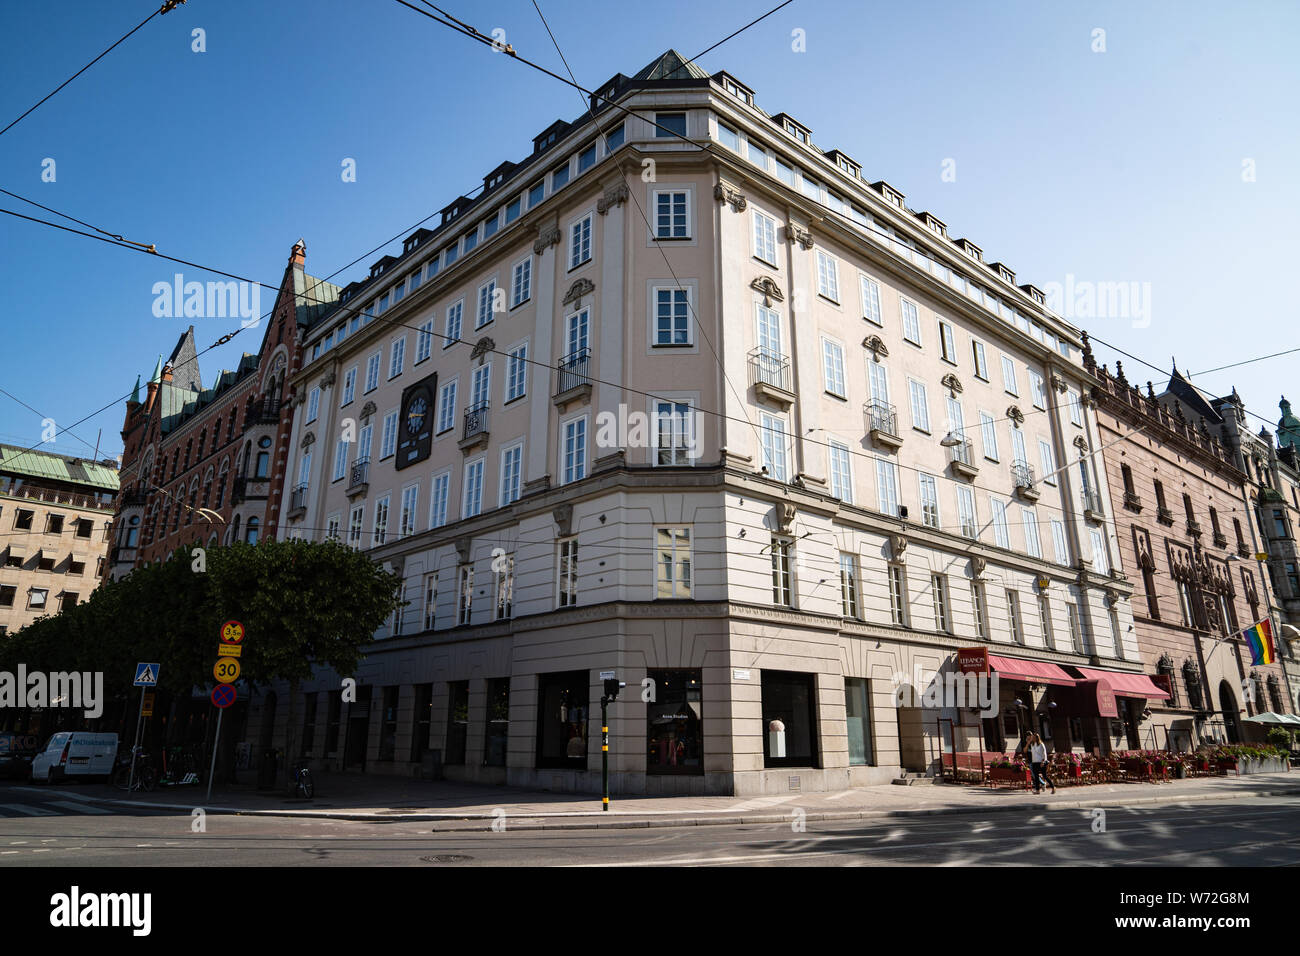 Hotel building that was the former bank famous for the Norrmalmstorg robbery that led to the phrase Norrmalmstorgssyndromet or 'Stockholm Syndrome'. Stock Photo